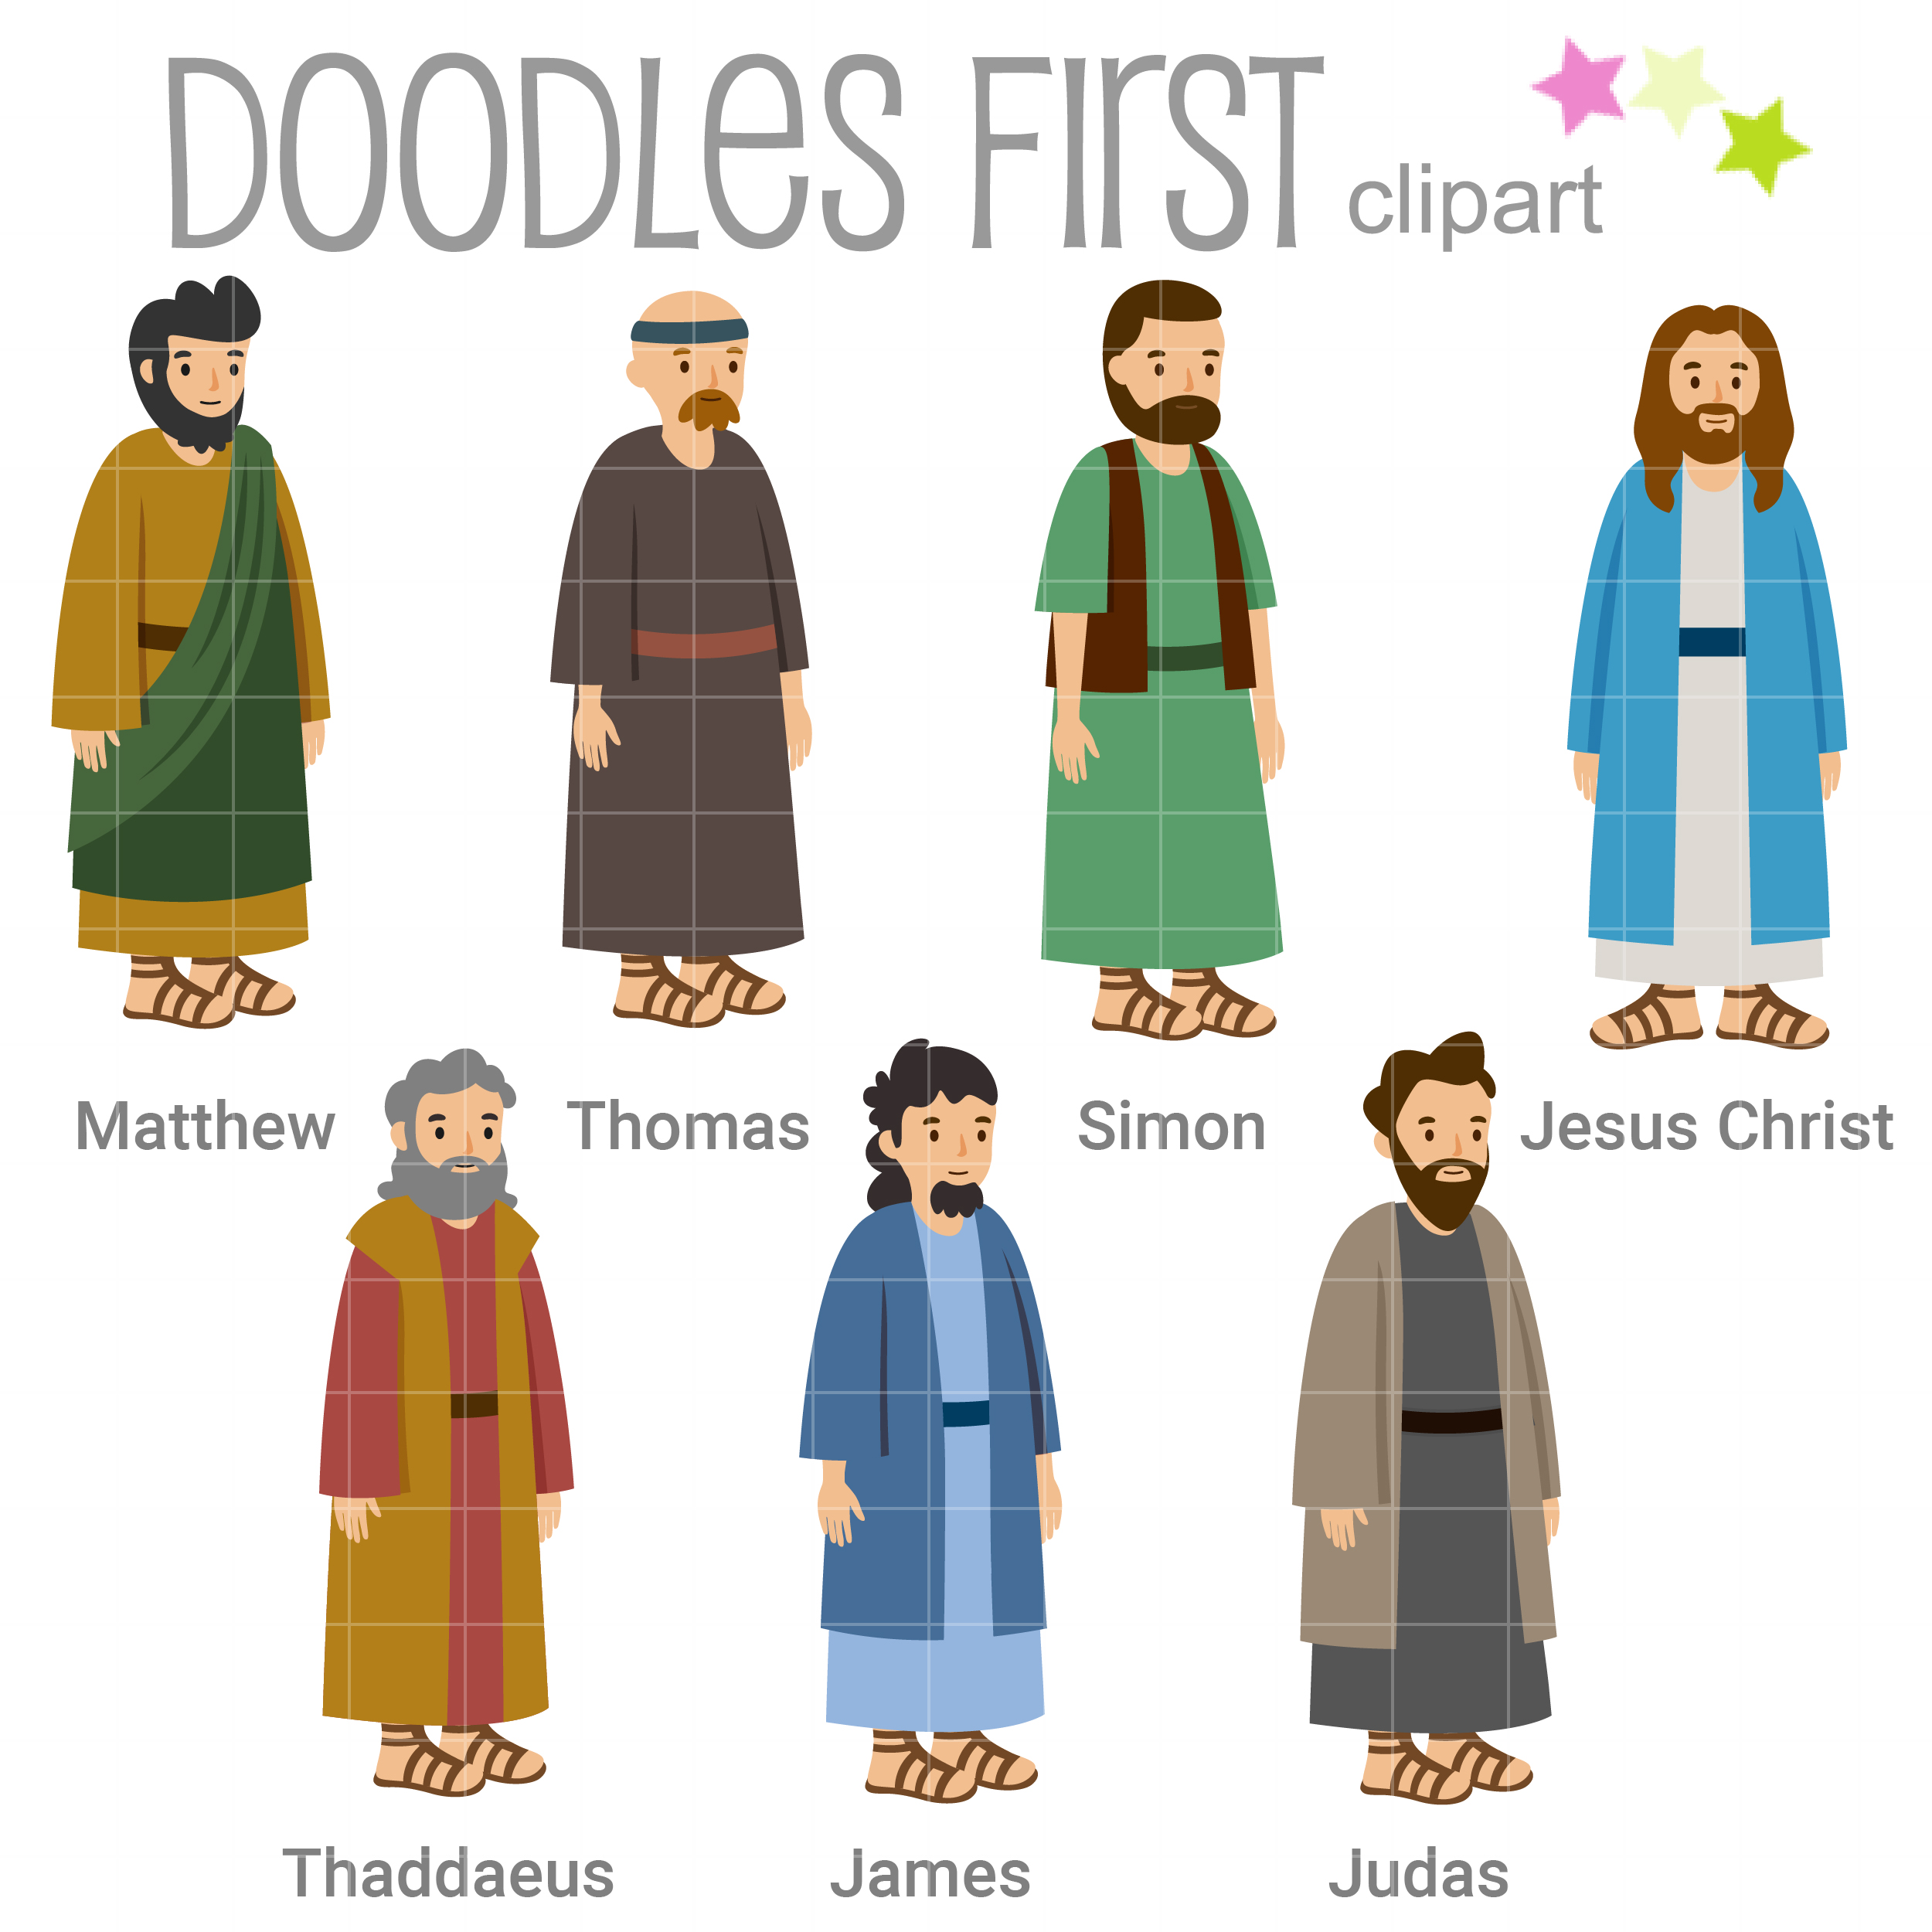 jesus-christ-and-6-of-the-12-disciples-clip-art-set-daily-art-hub